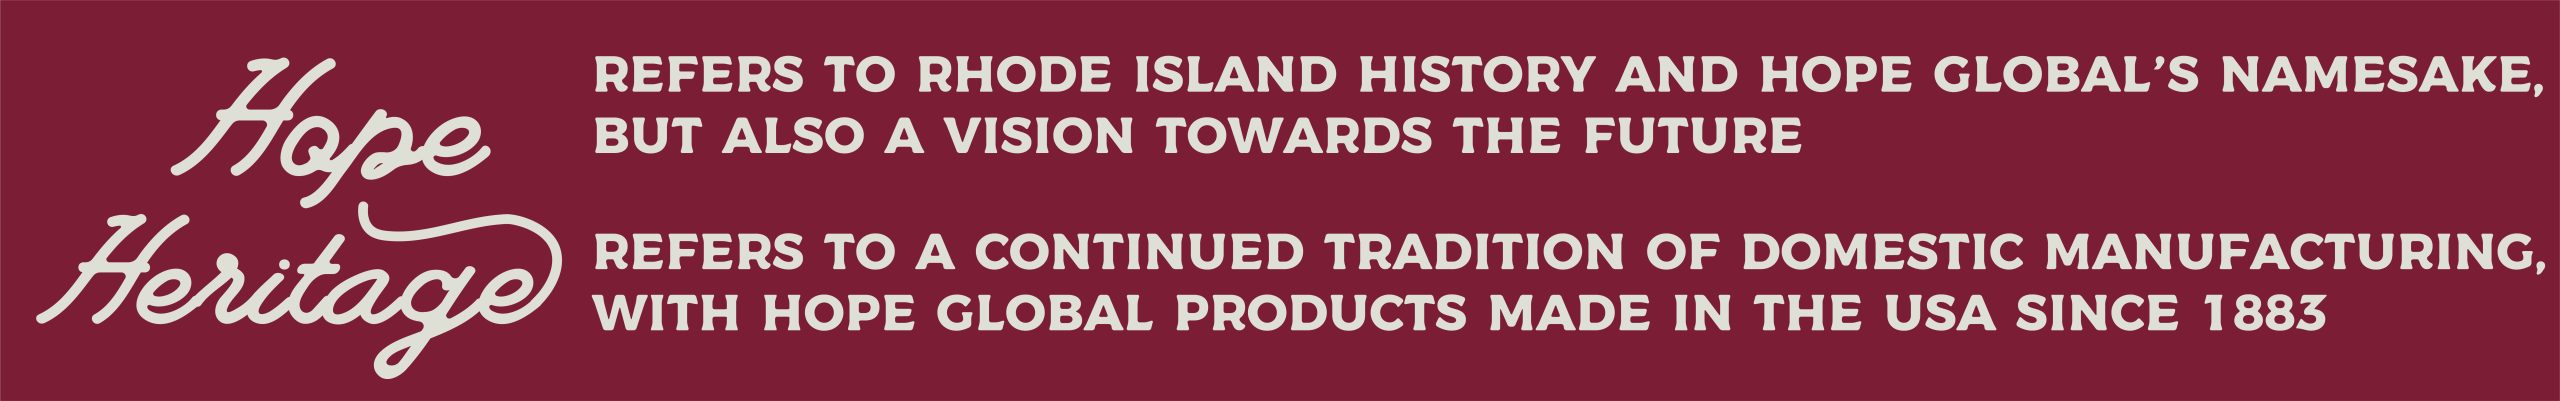 Hope and Heritage Refers to Rhode Island History and Hope Global's namesake, but also a vision towards the future Refers to a continued tradition of domestic manufacturing with Hope Global products made in the USA since 1883